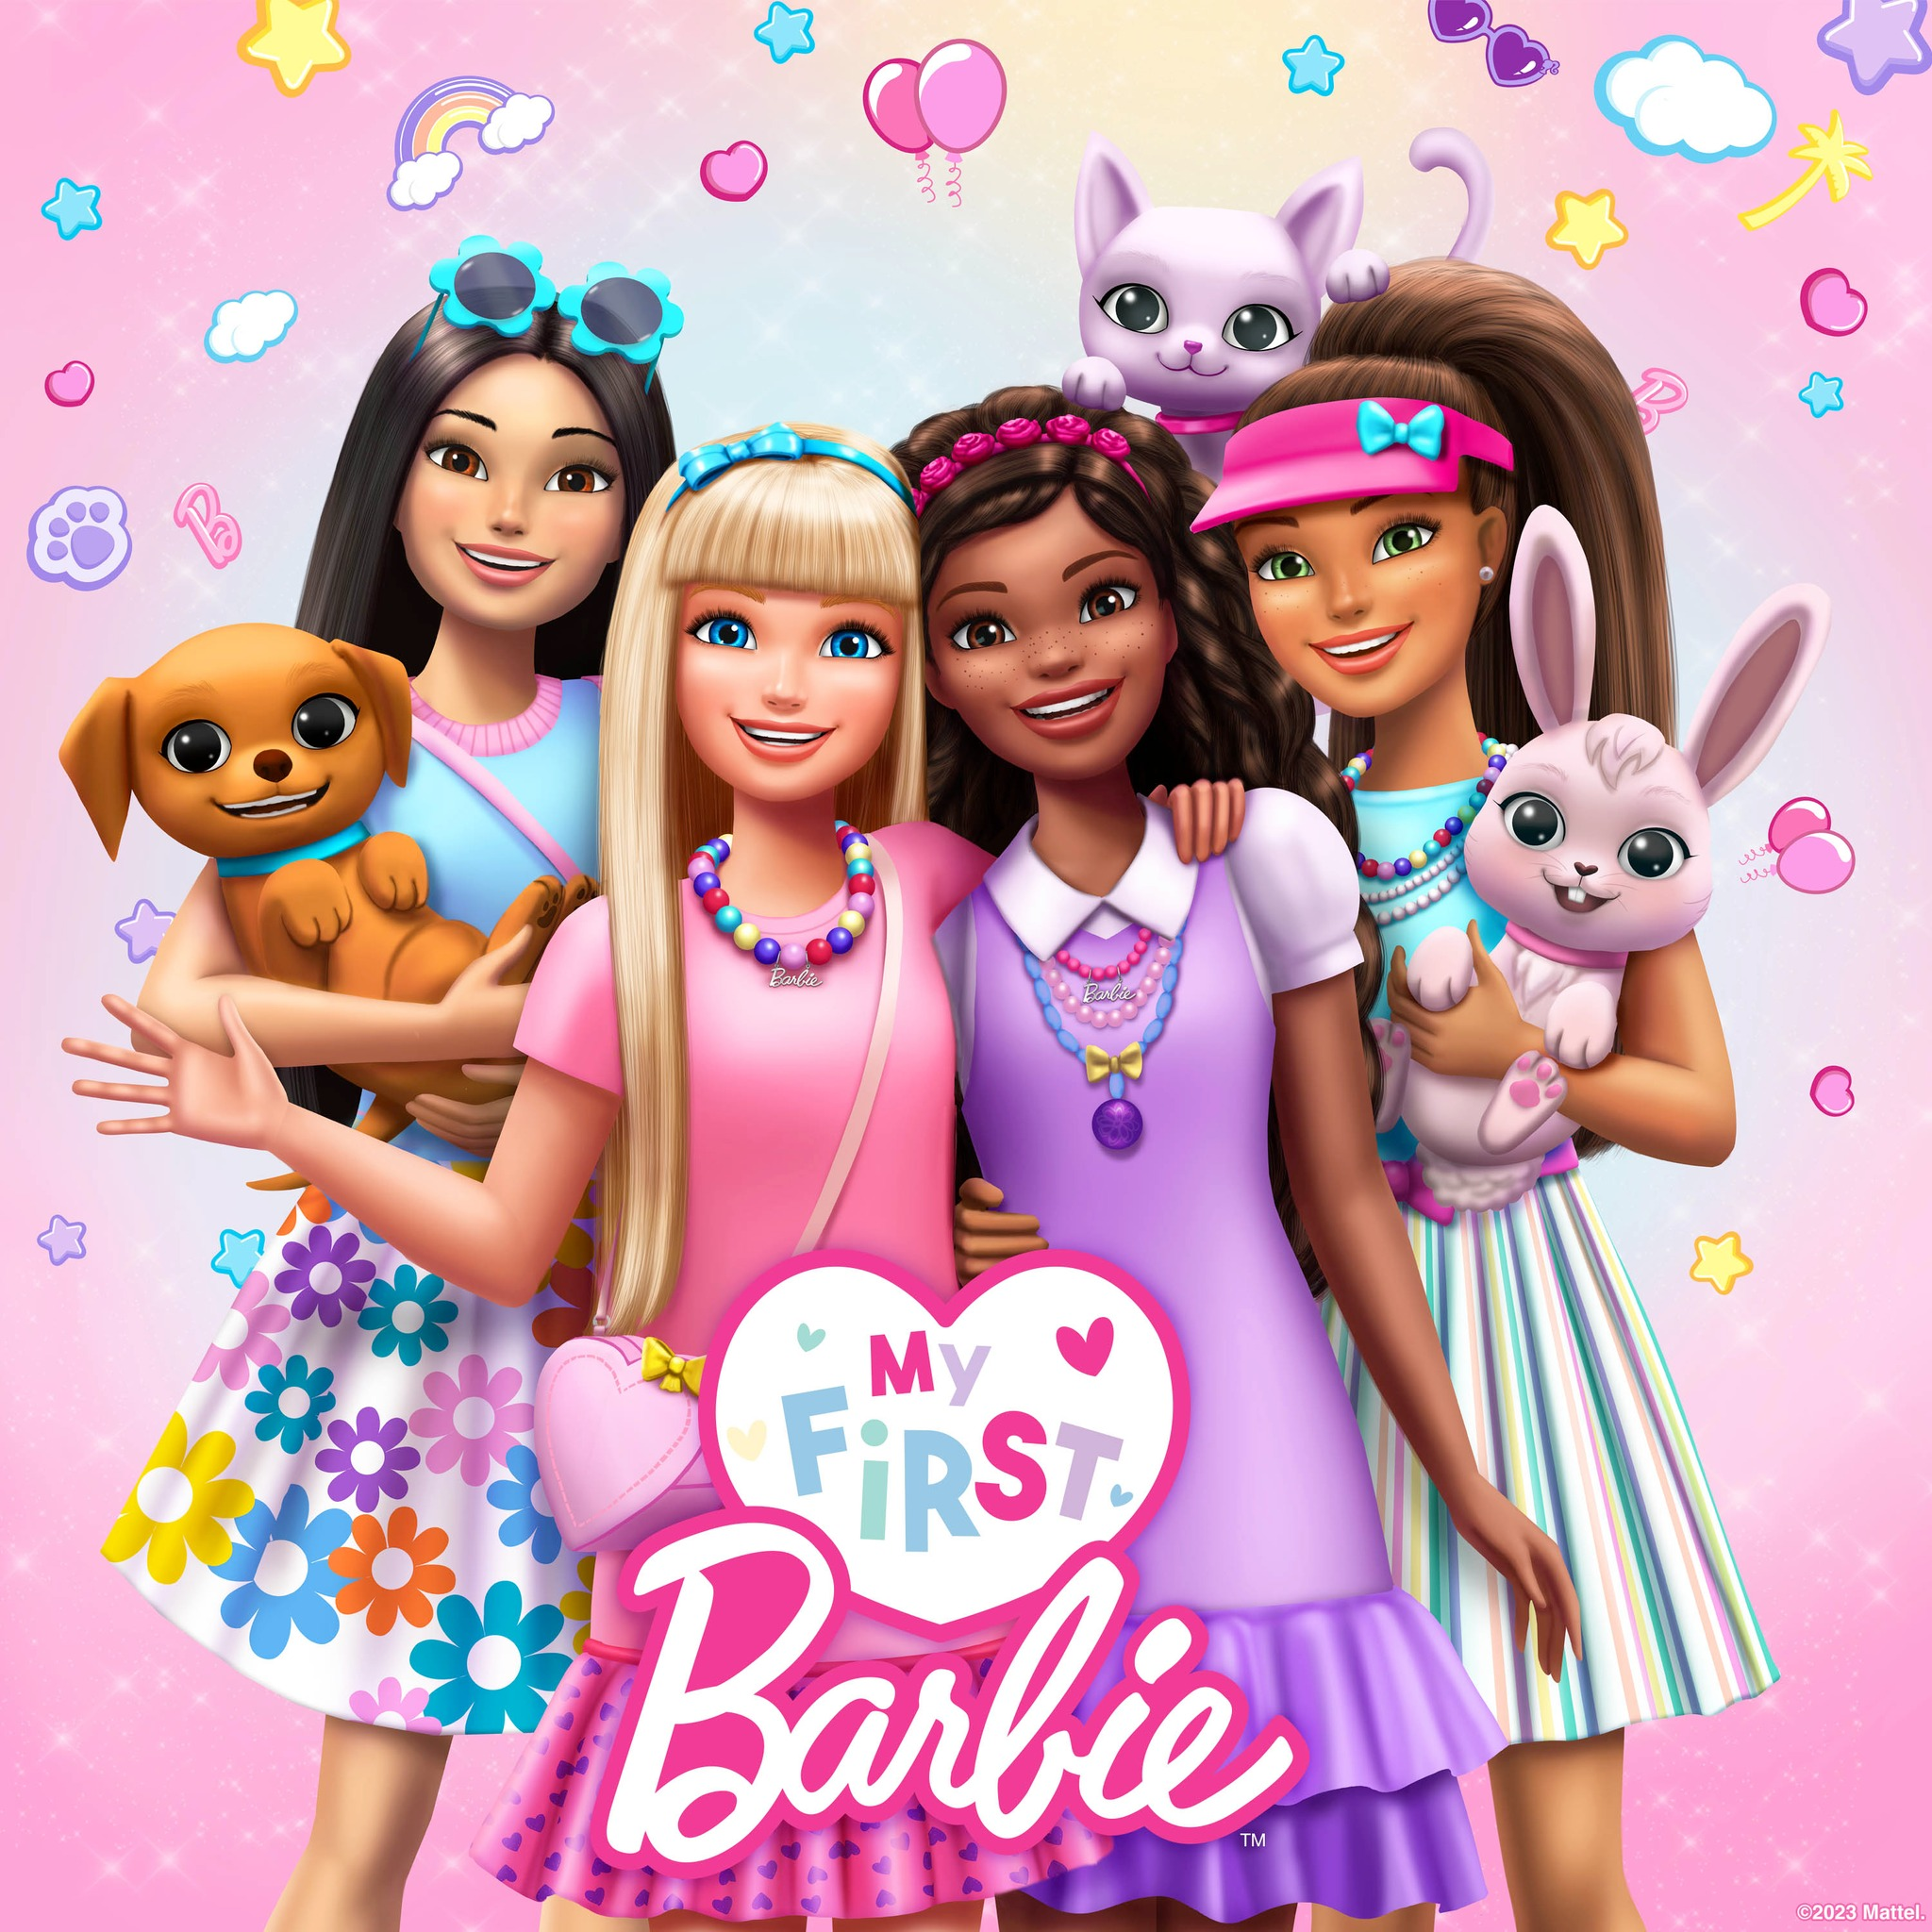 My First Barbie: Happy DreamDay My First Barbie animated special -  